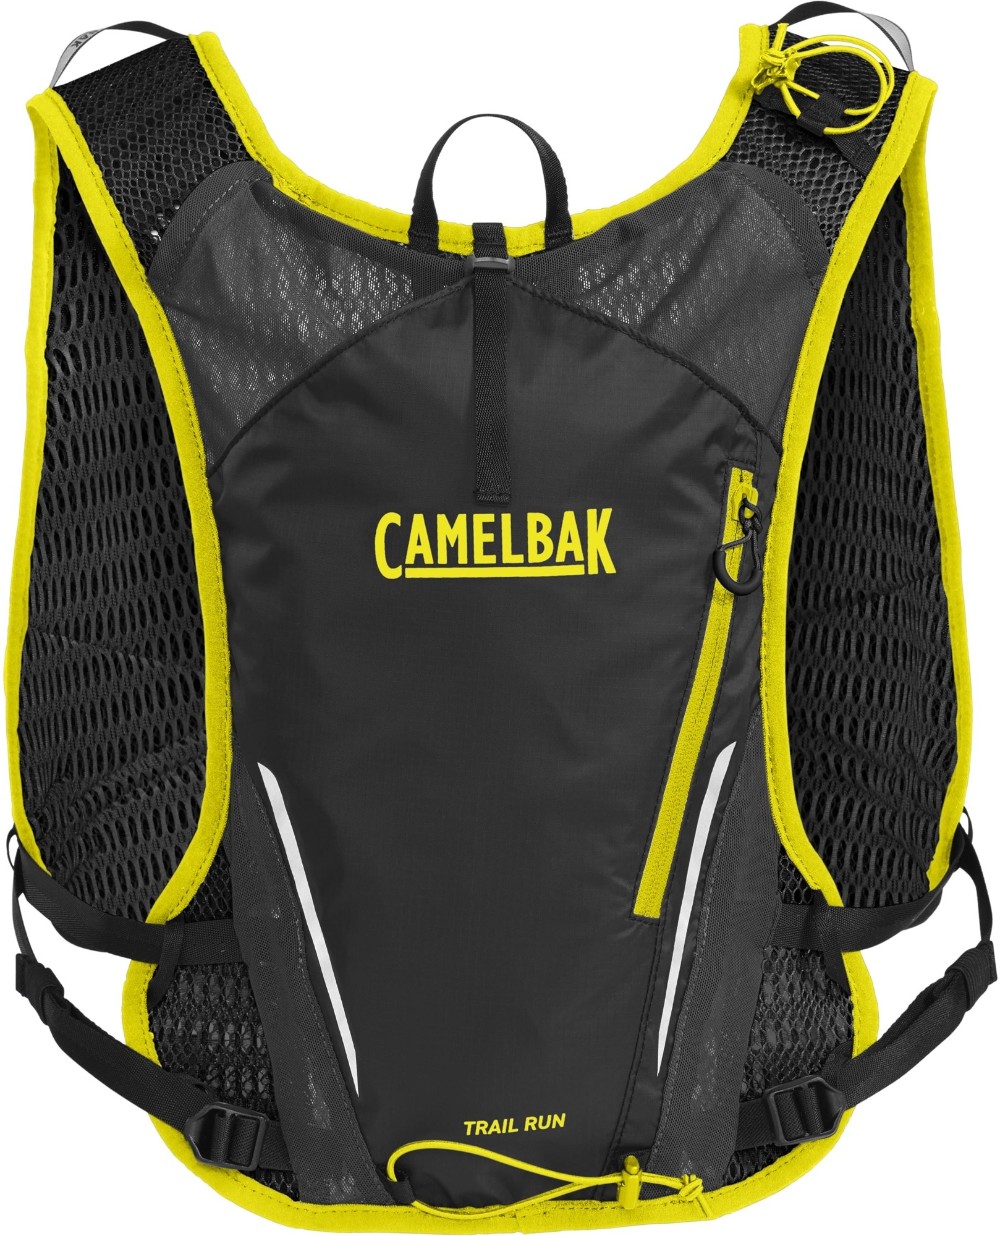 Trail Run 7L Hydration Vest  with 2 x 500ml Quick Stow Flasks image 2